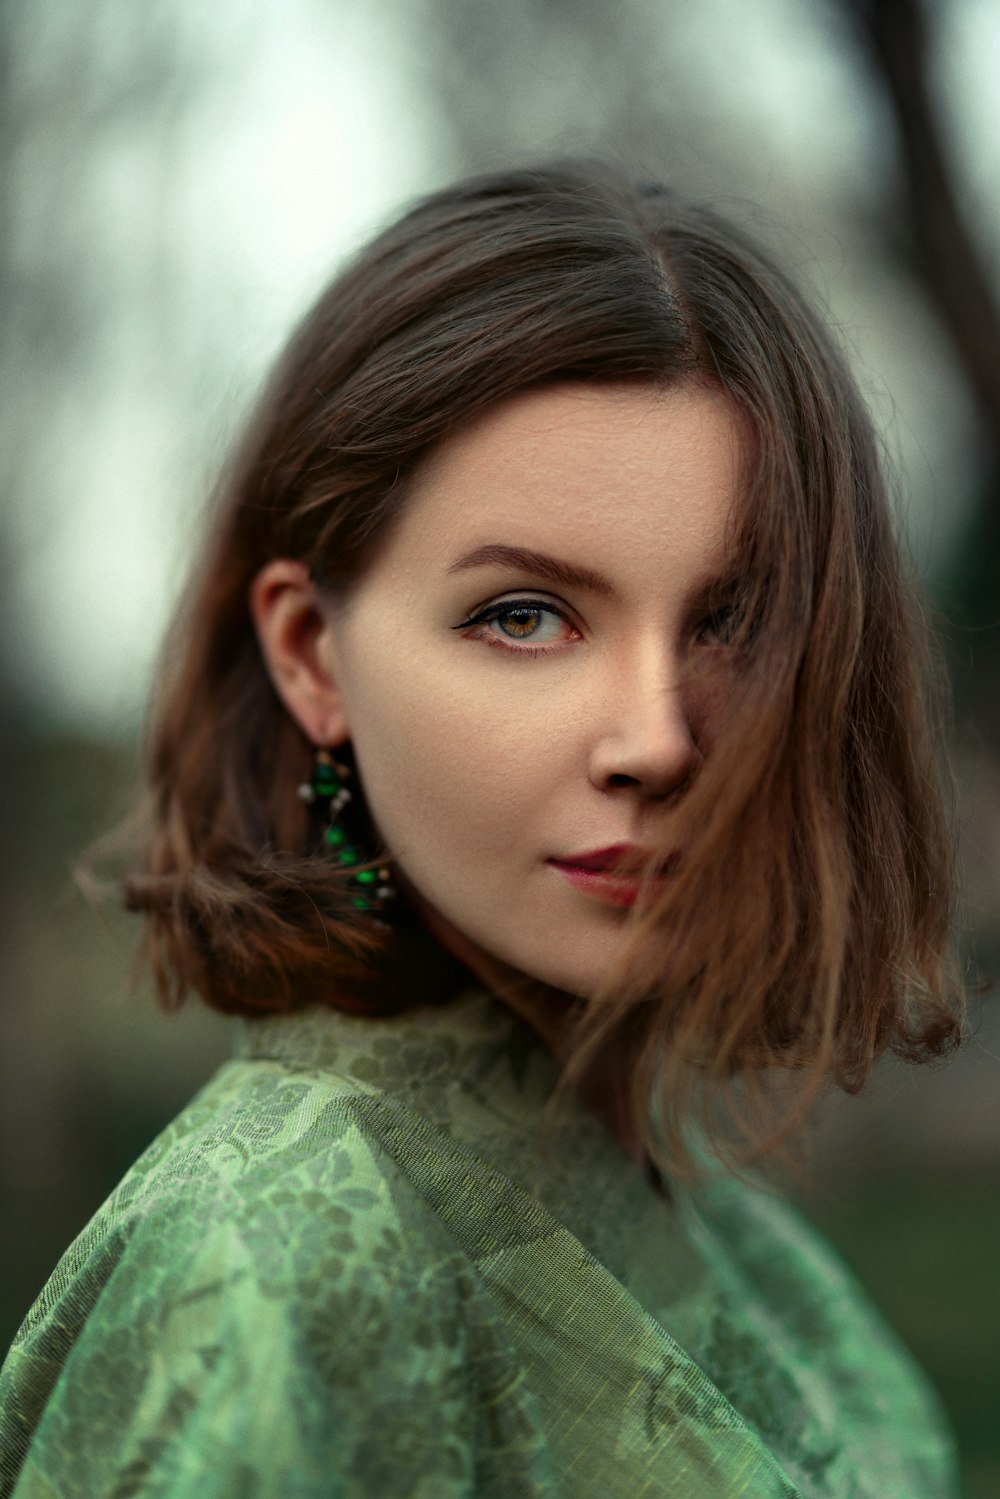 a woman with a green shirt and earrings